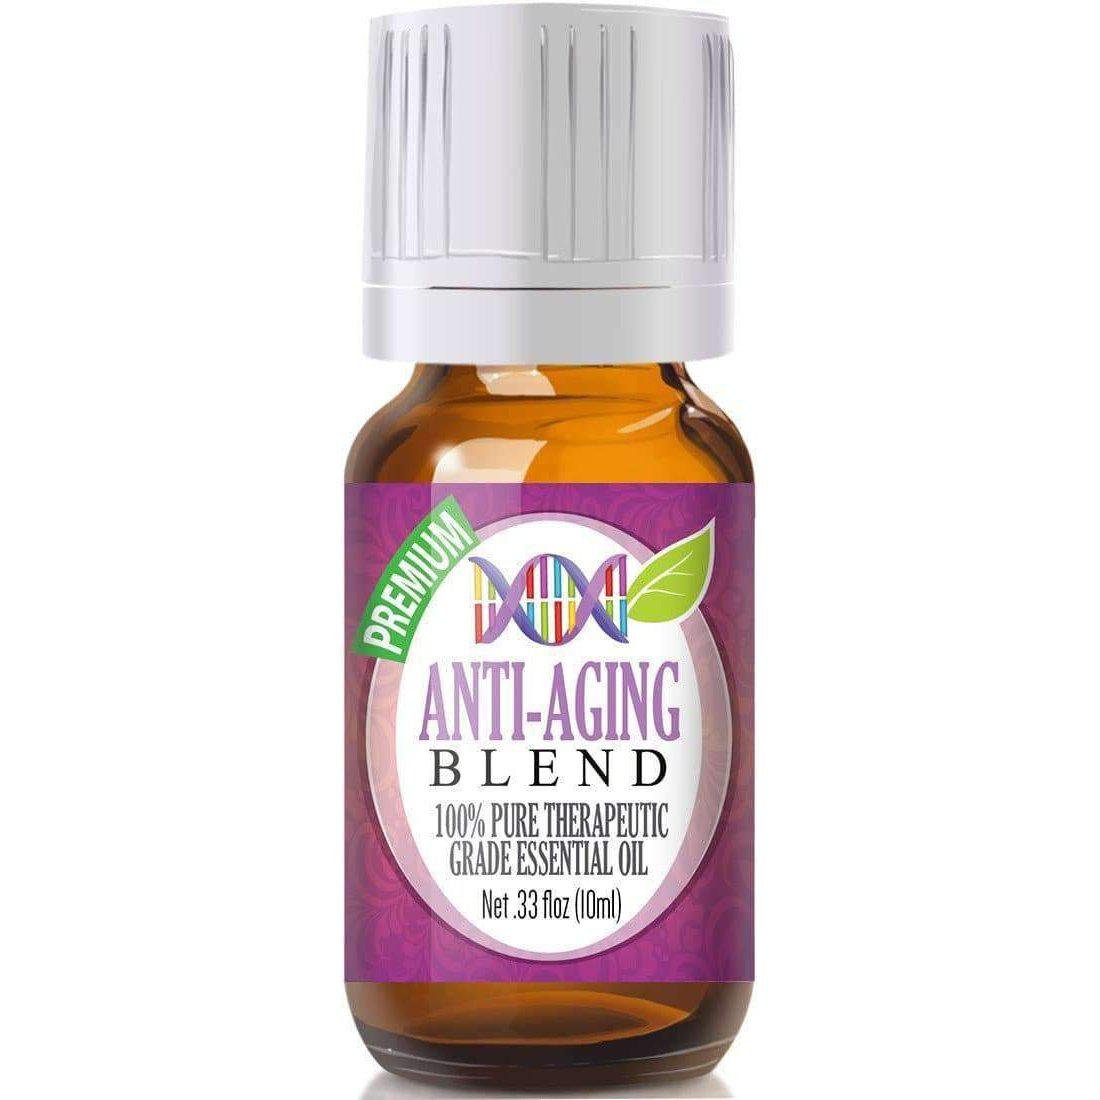 Skin Tone Essential Oil Blend for Anti-Aging, Dry Skin & Youthful